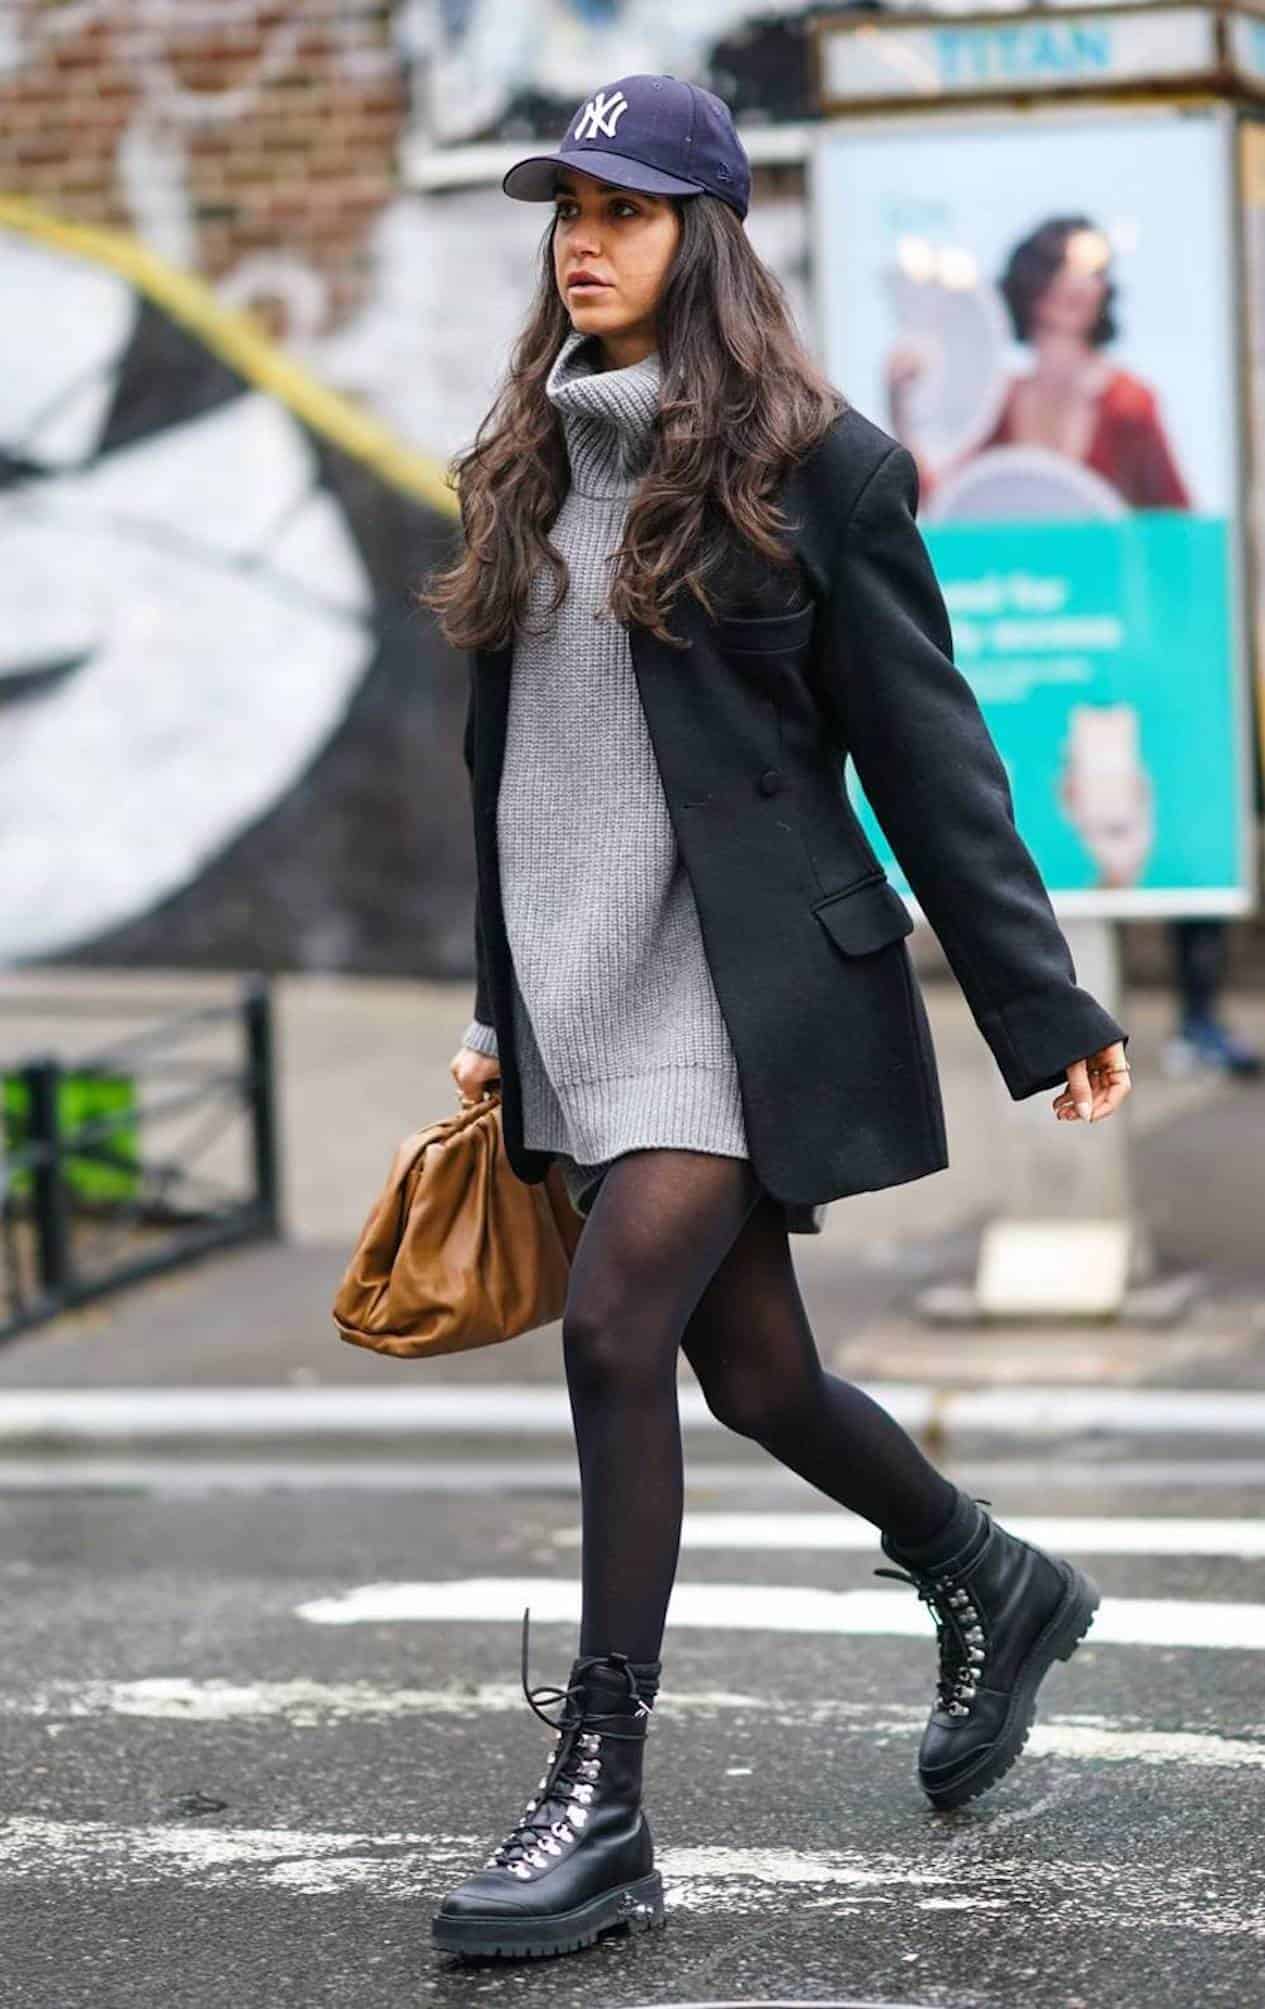 Woman wearing a sweater dress and combat boots.